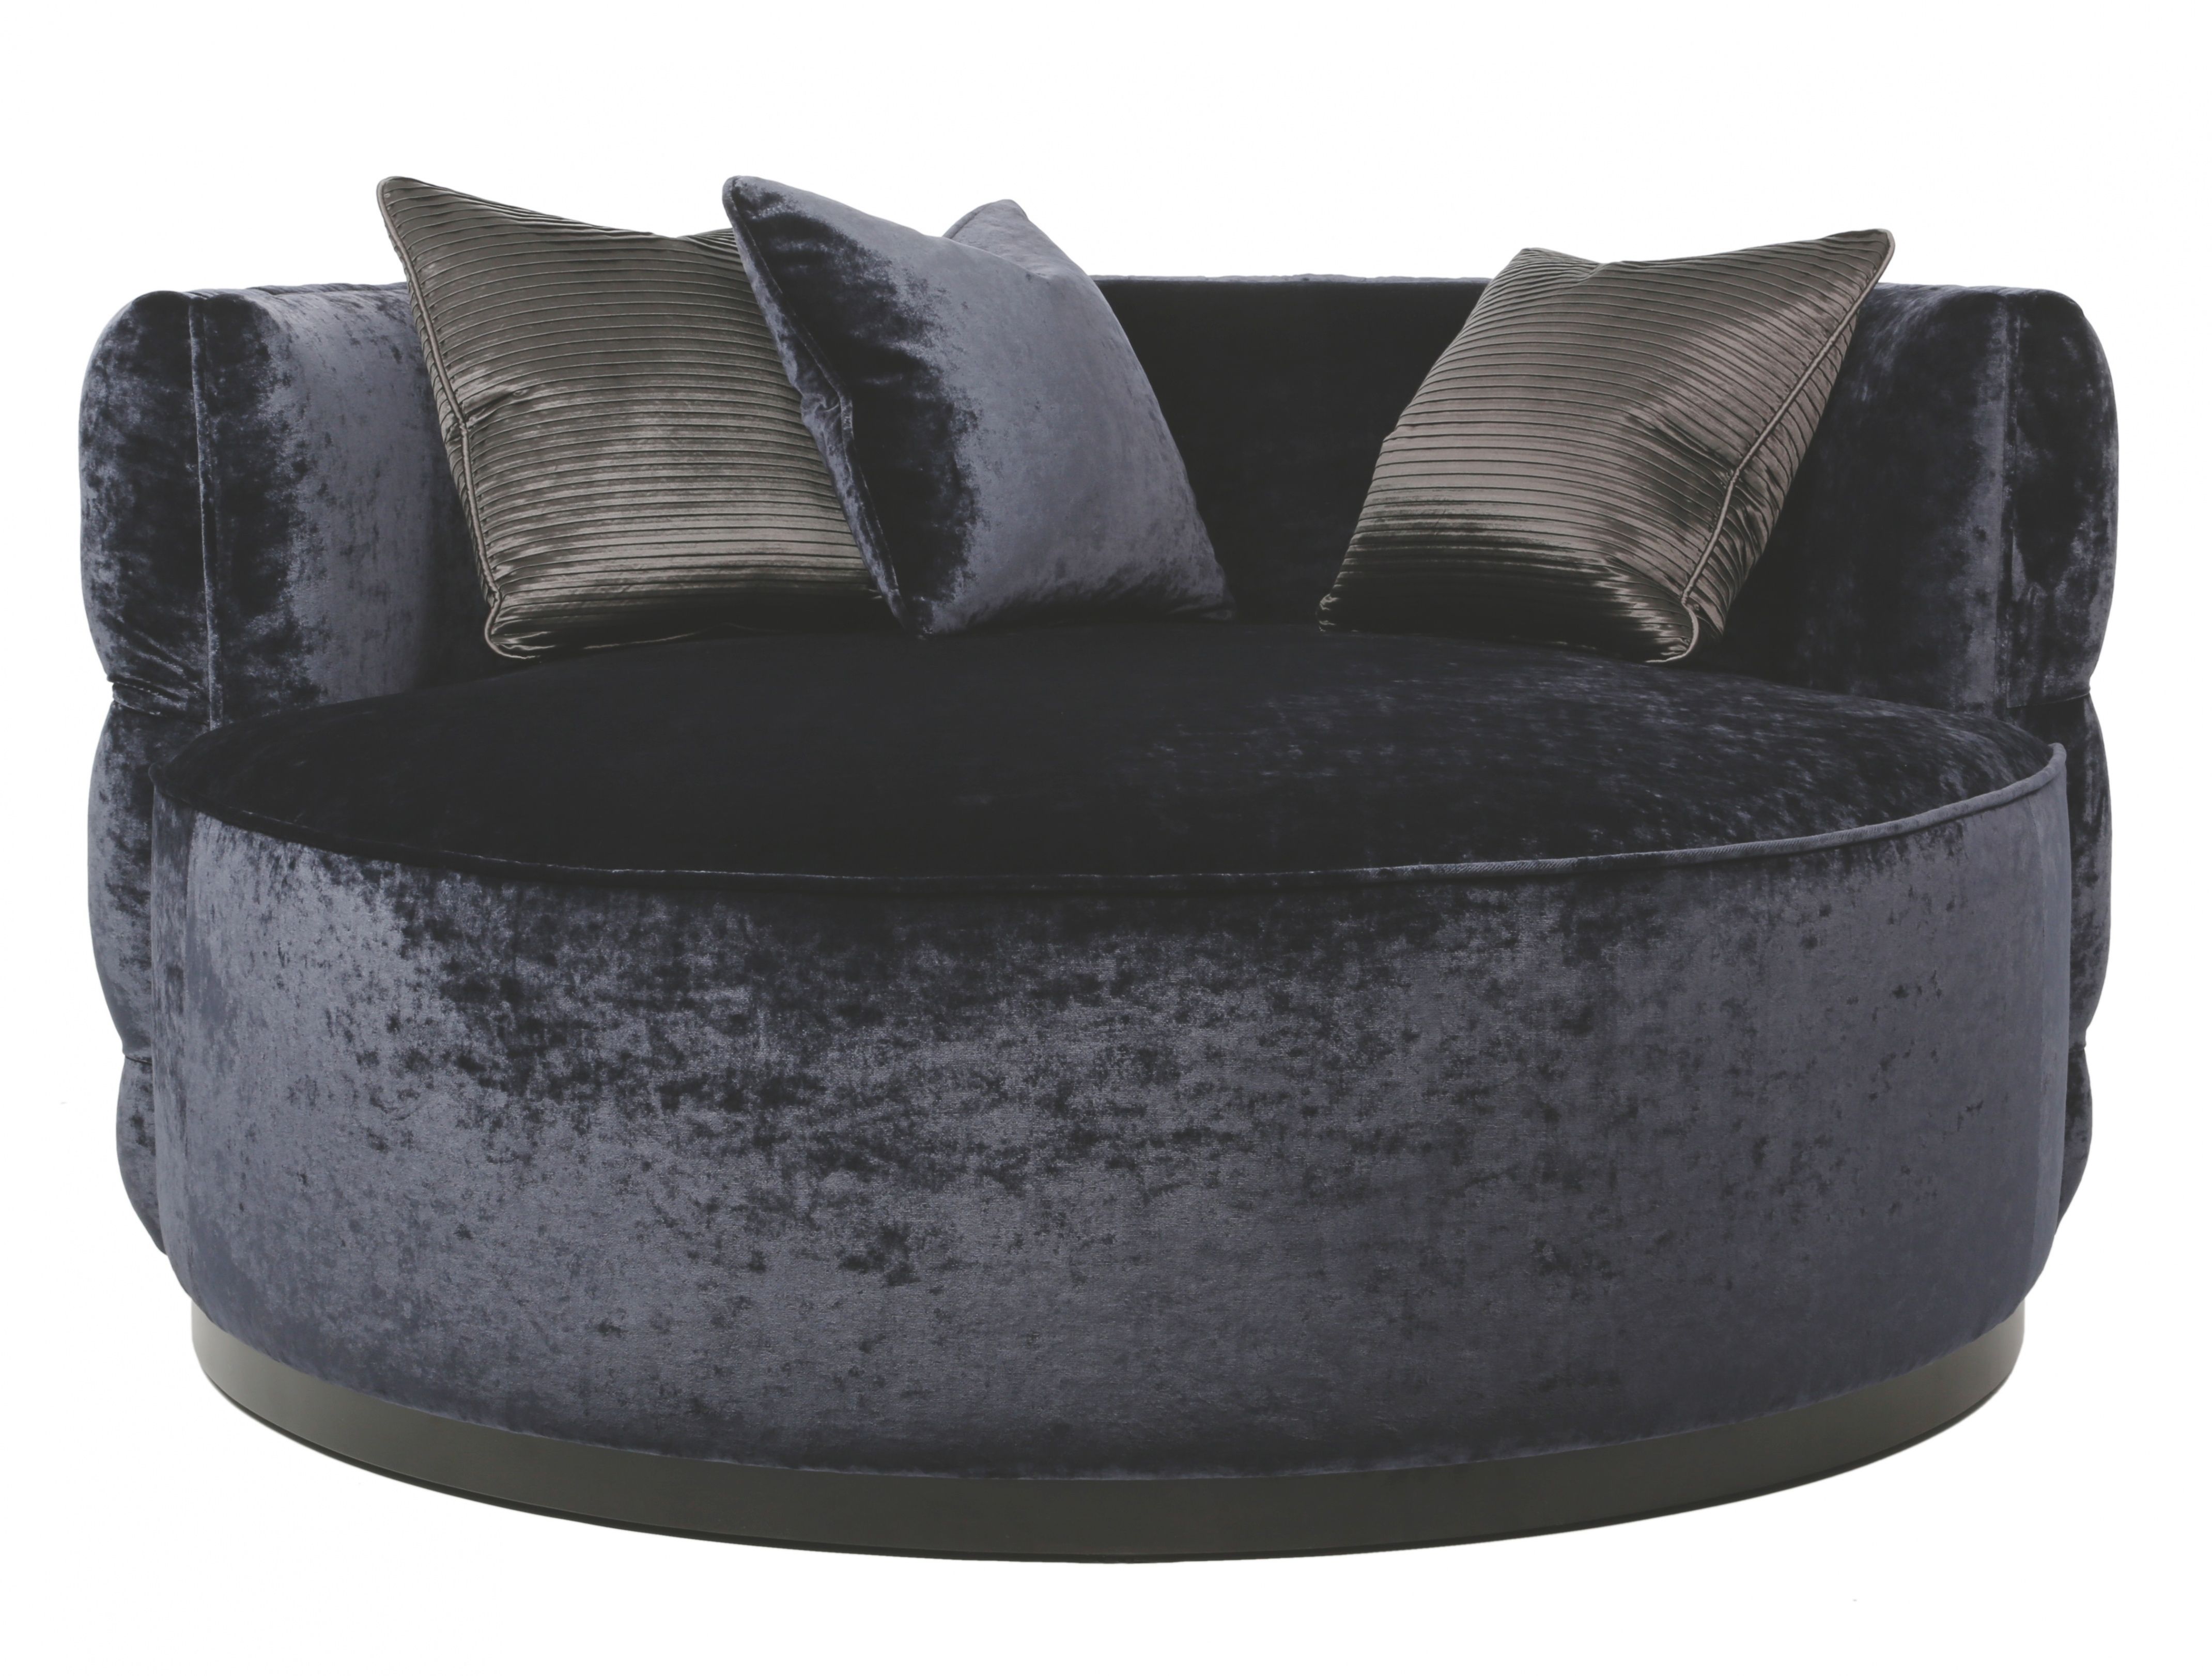 Great Round Sofa Chair 82 For Your Living Room Sofa Inspiration For Round Sofa Chairs (View 6 of 15)